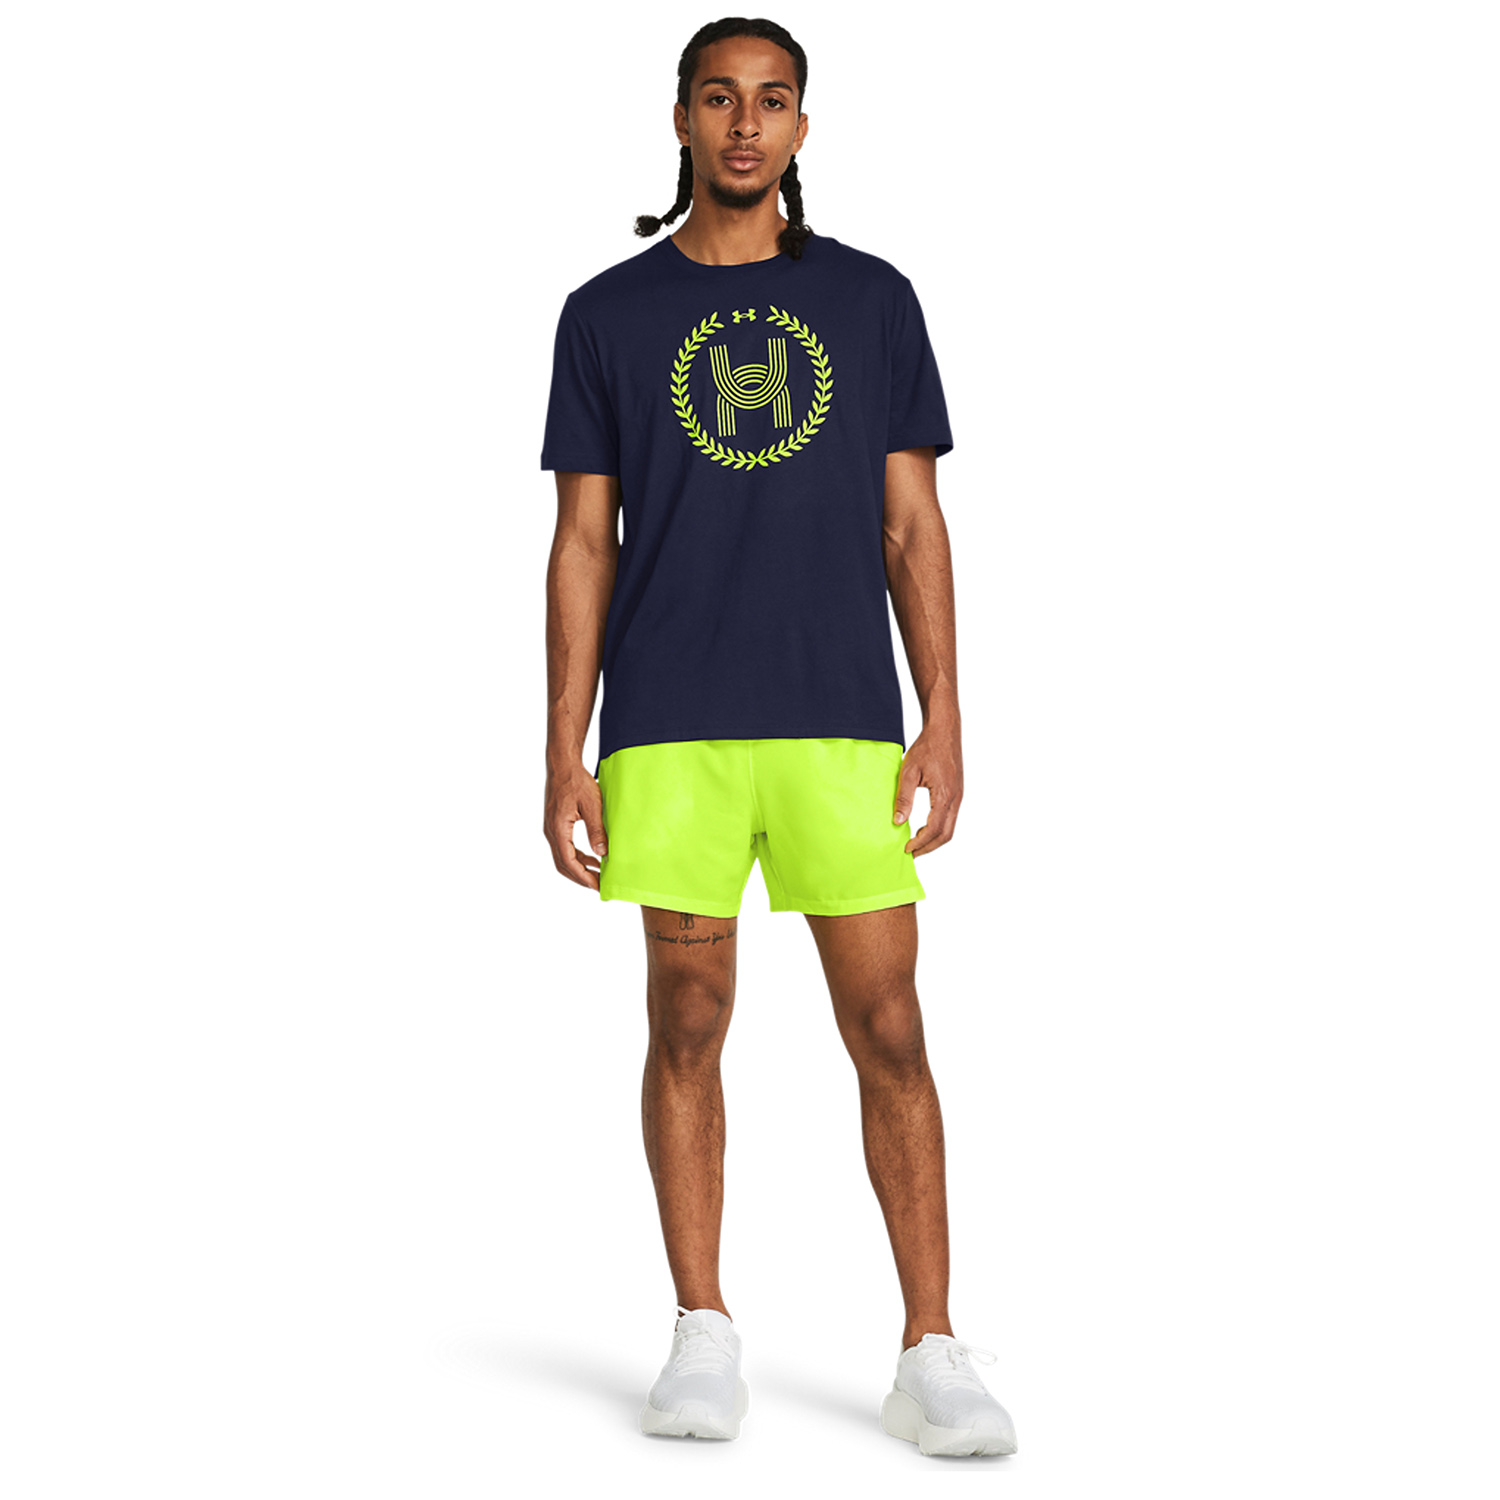 Under Armour Launch 5in Shorts - High Vis Yellow/Reflective